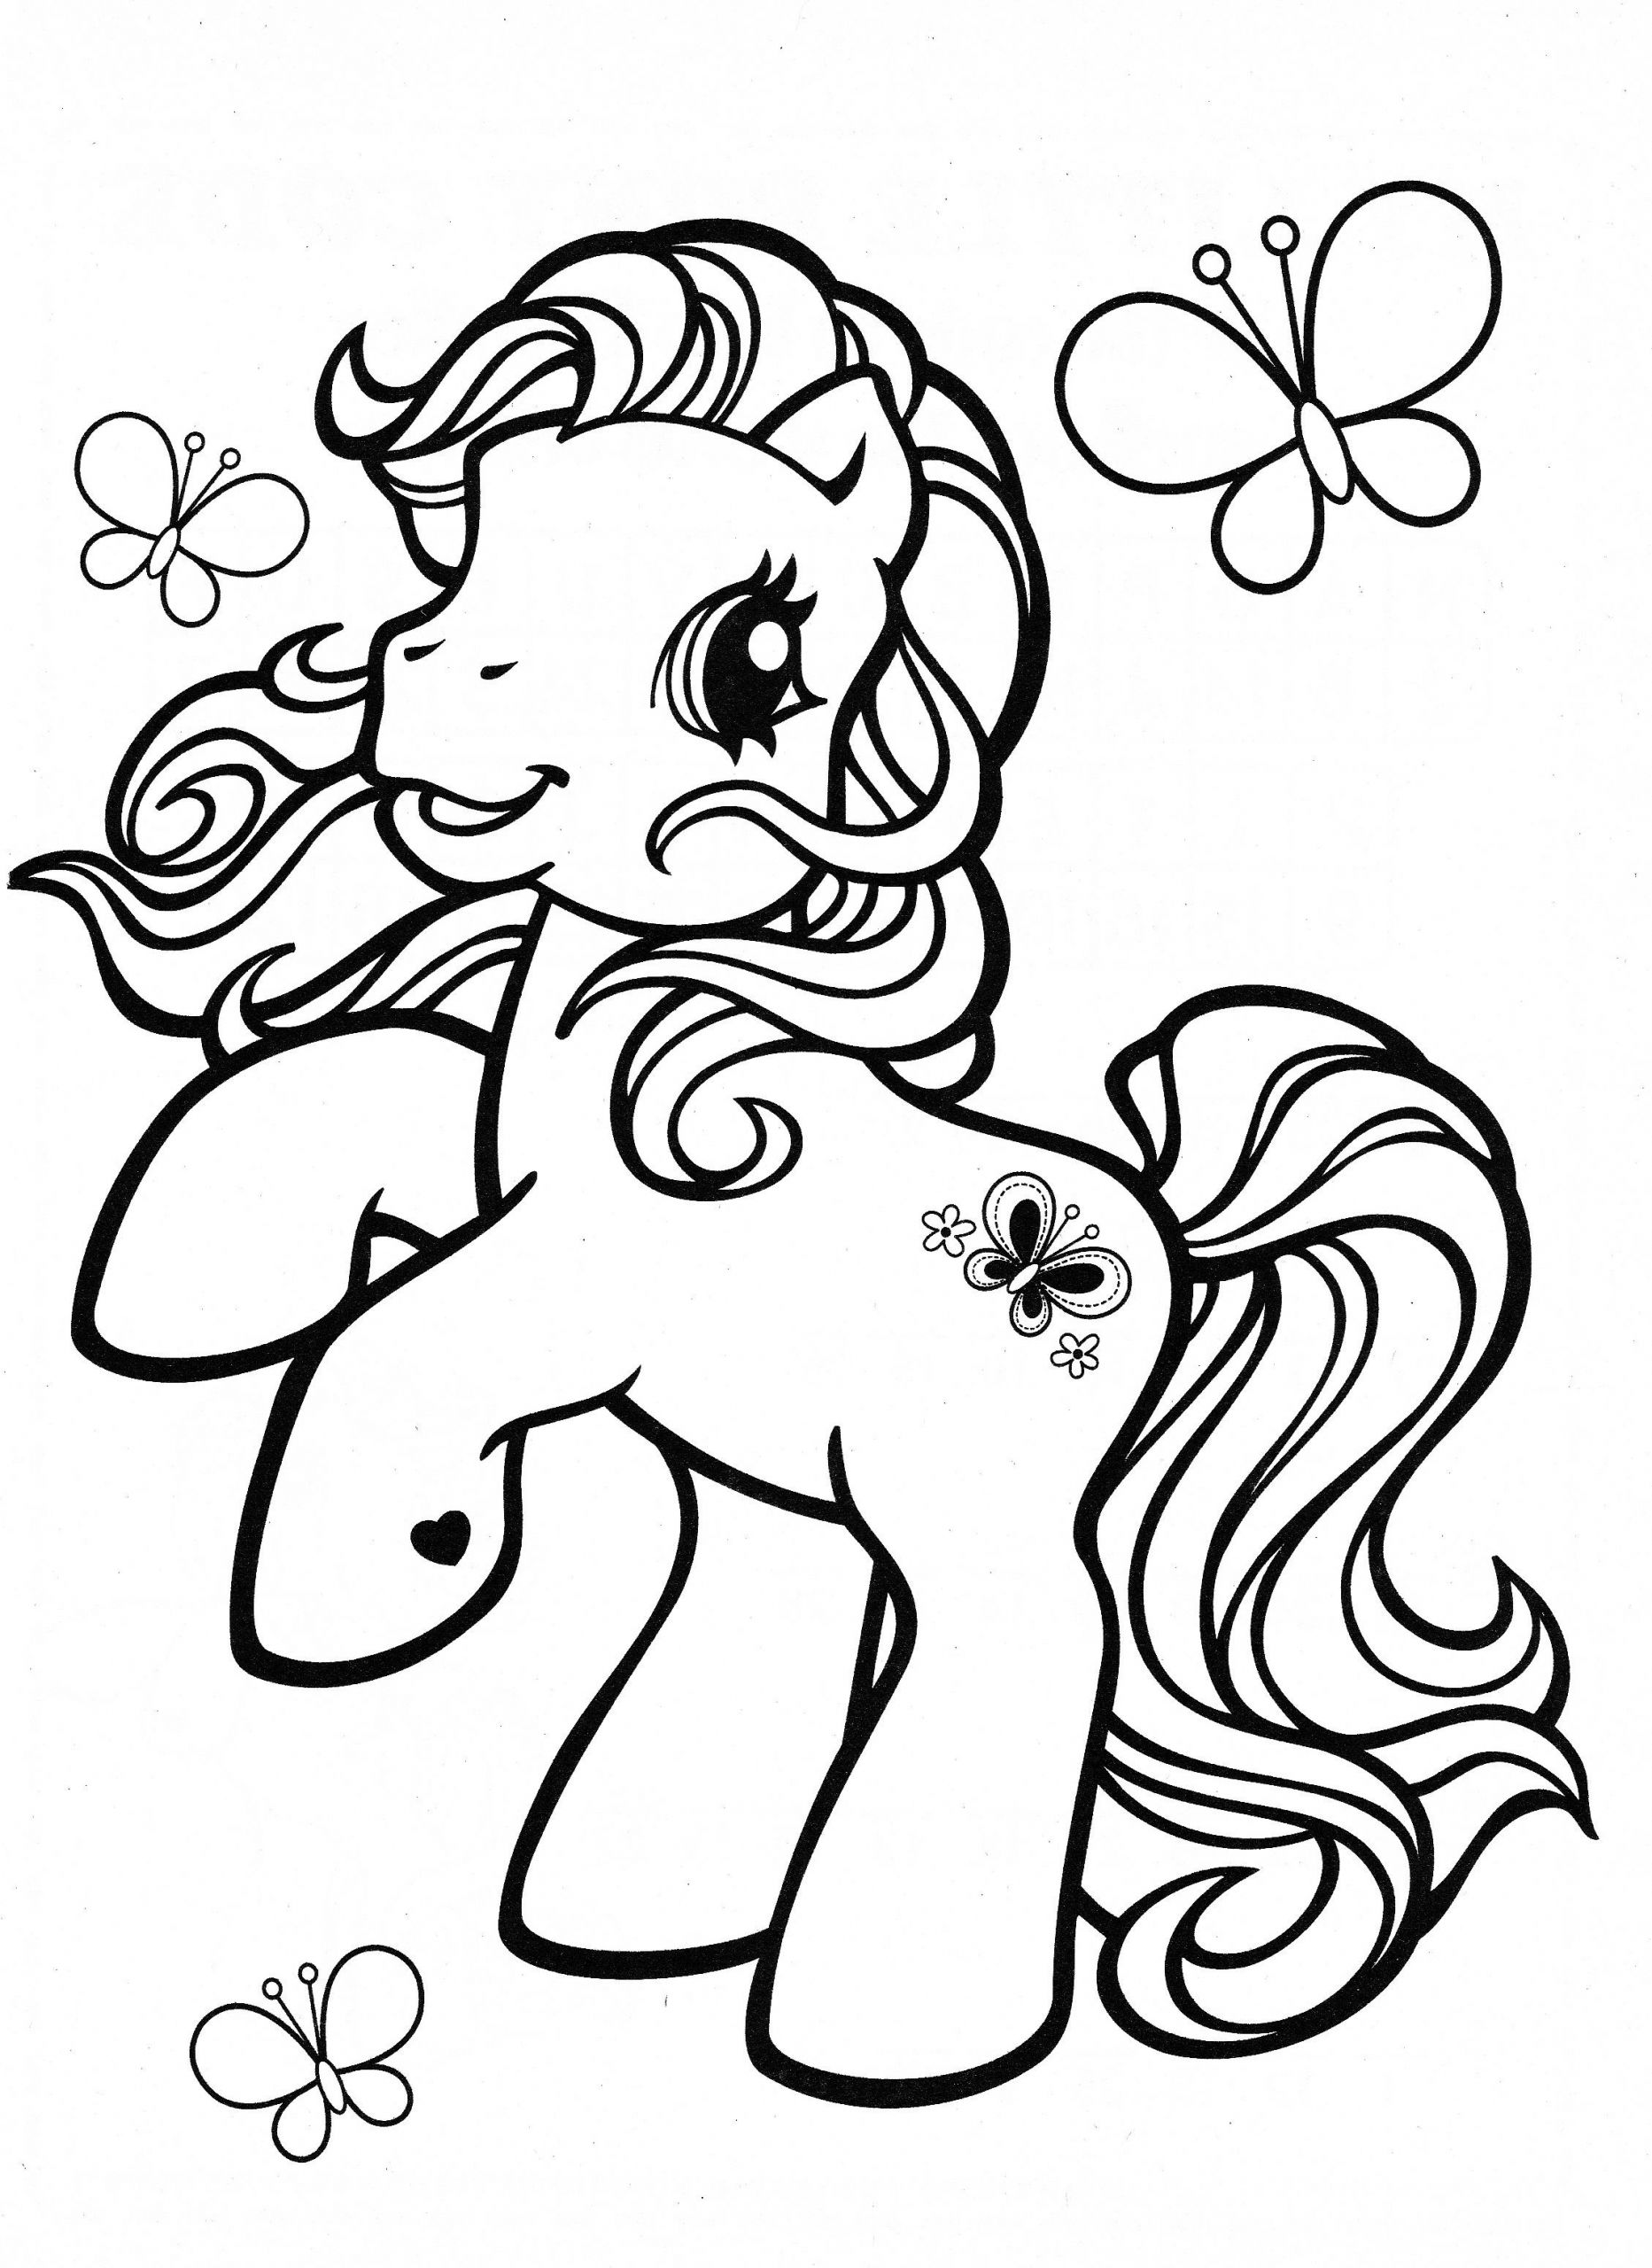 Coloring Sheets For Little Kids
 My Little Pony coloring page MLP Scootaloo